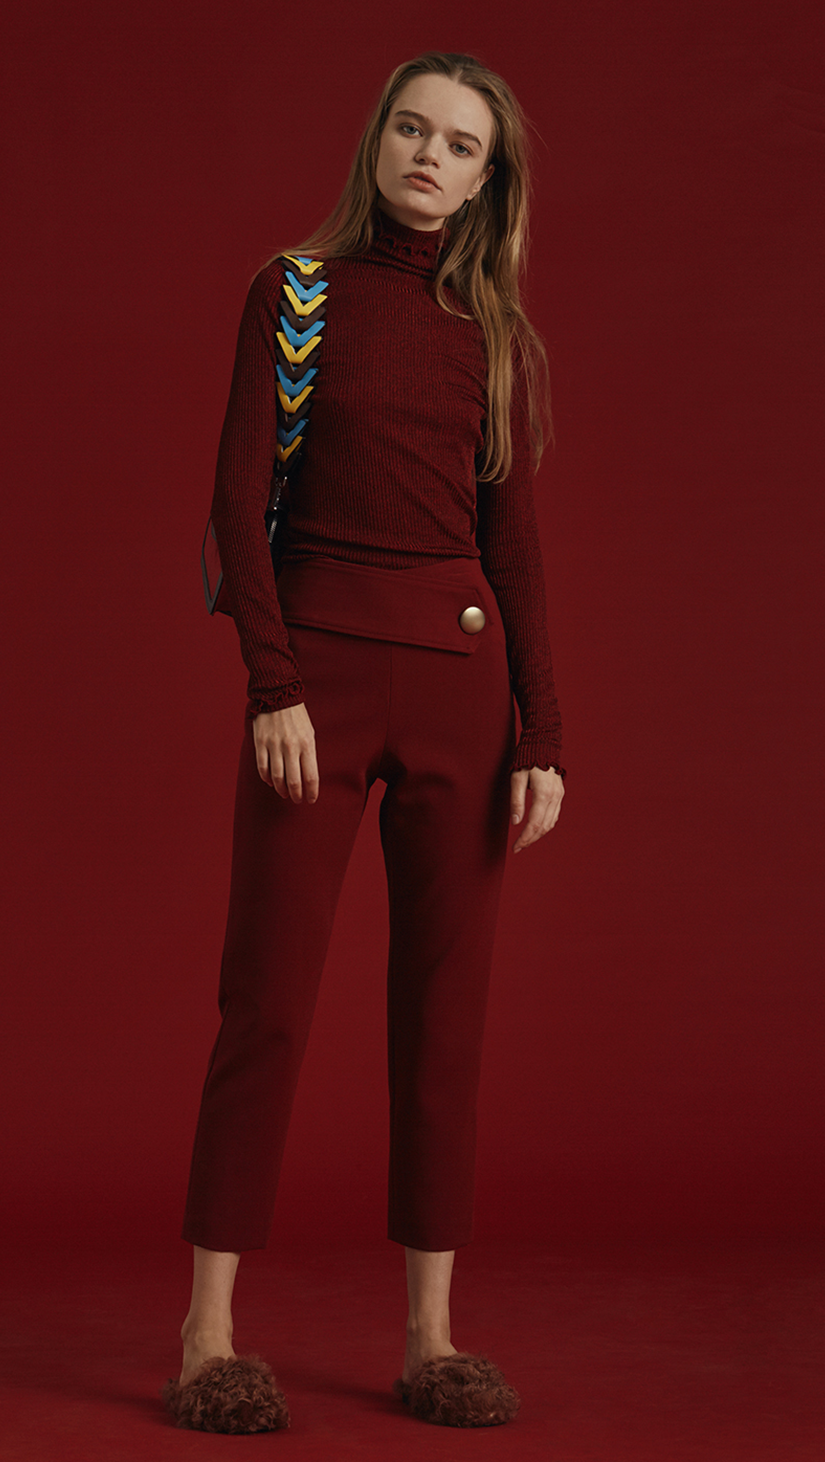 Maloné is a lightweight turtleneck knit in metallic bordeaux. With a ruffle neck cuff detail. Designed to be slim fit. 